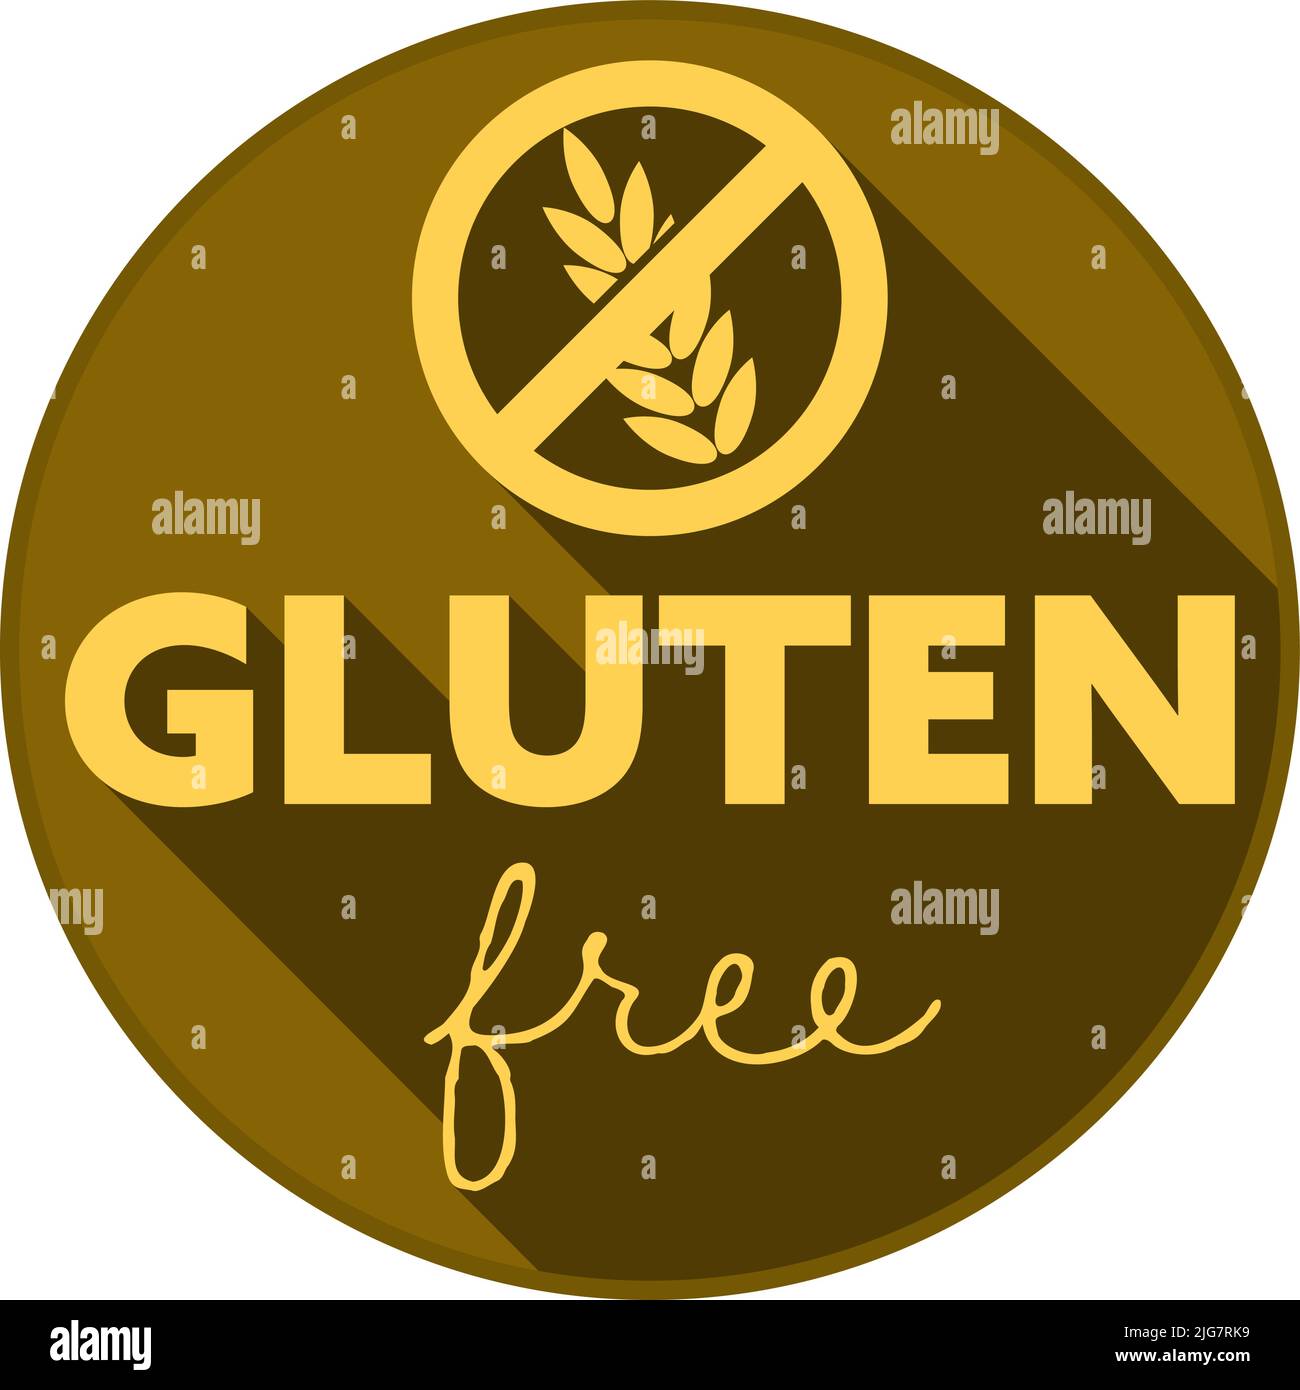 round GLUTEN FREE label or sign, vector illustration Stock Vector